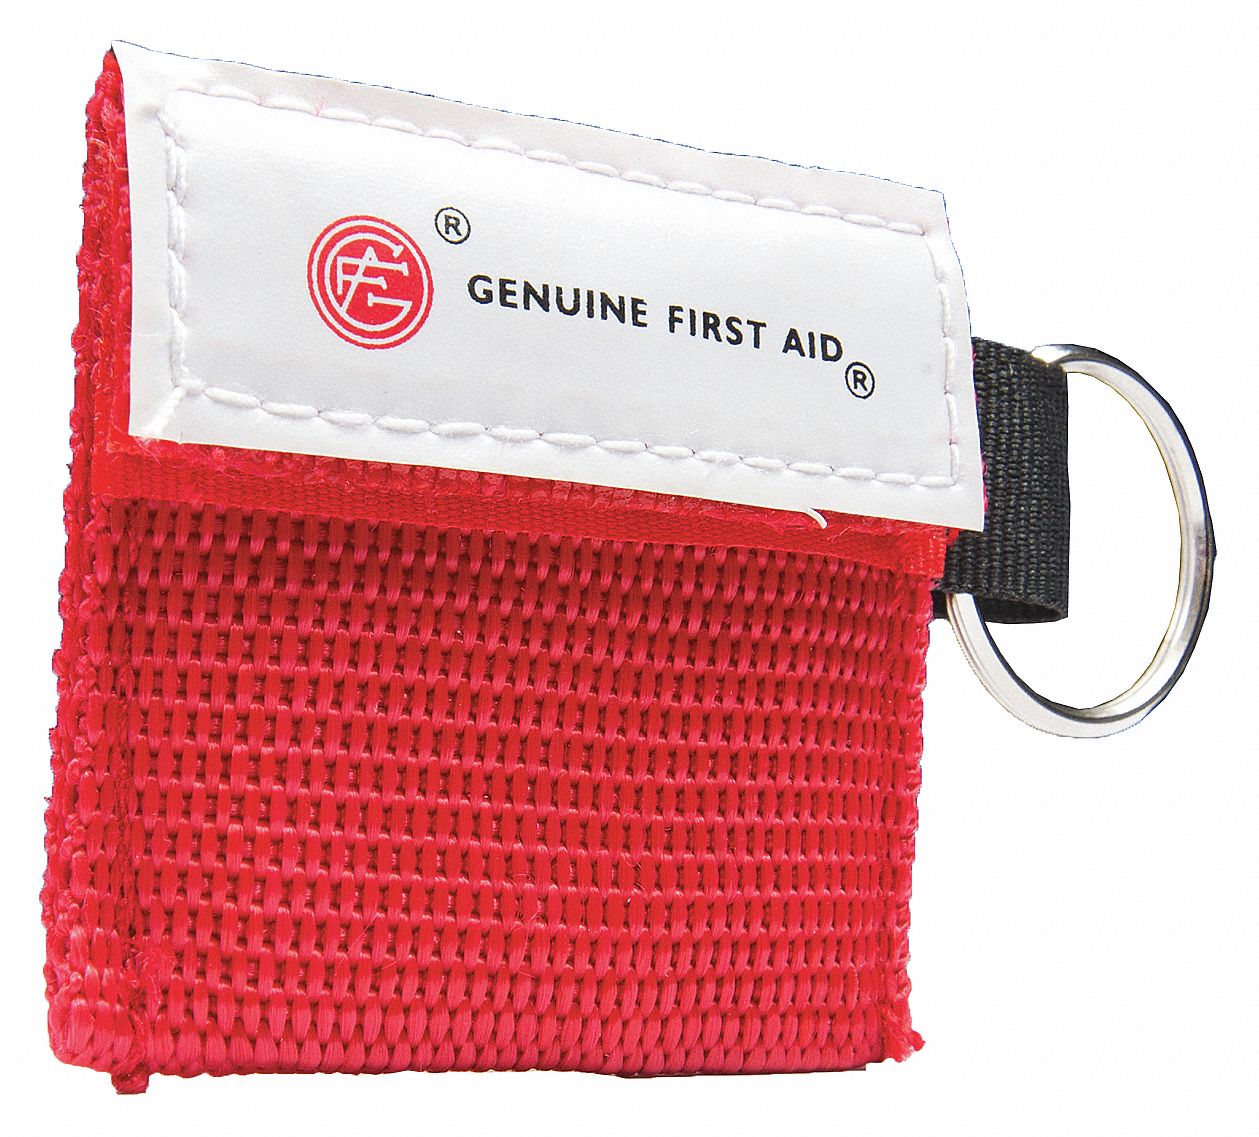 Mini CPR Key Ring with One Way Valve: Mini CPR Key Ring with One Way Valve, Small